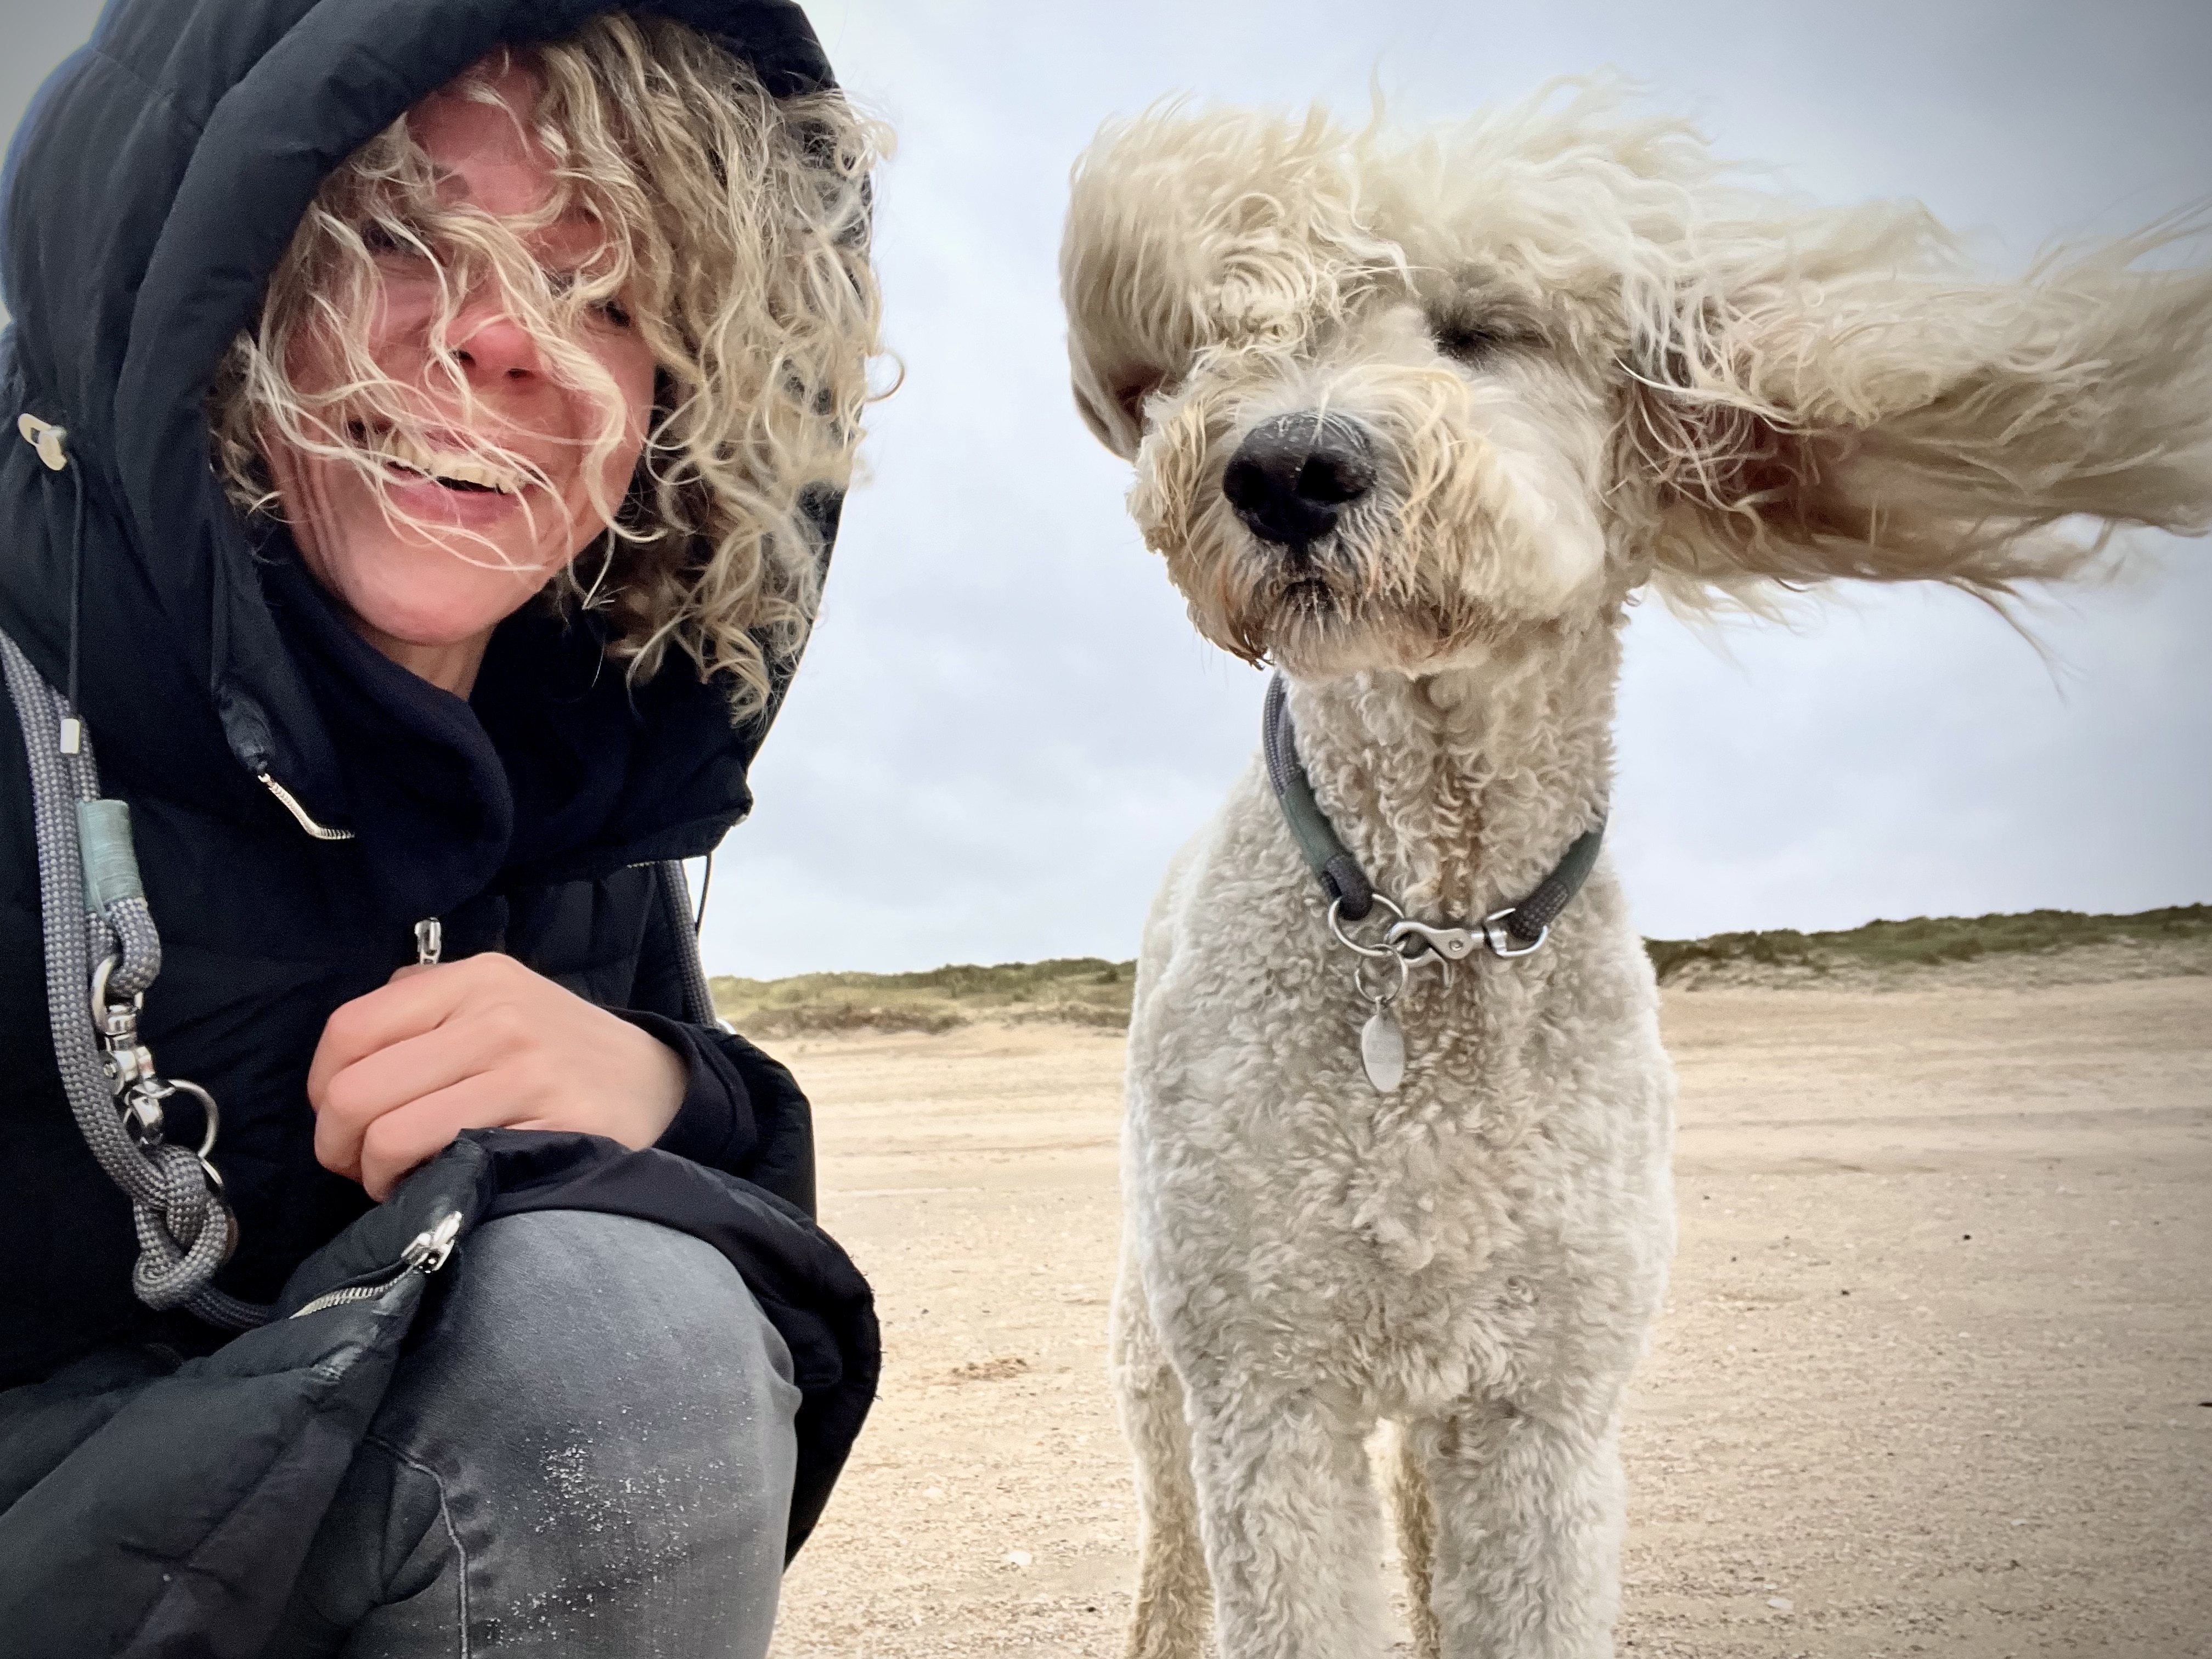 A female taking a selfie with her dog. Her hair and the dogs curly hair are flowing in the wind